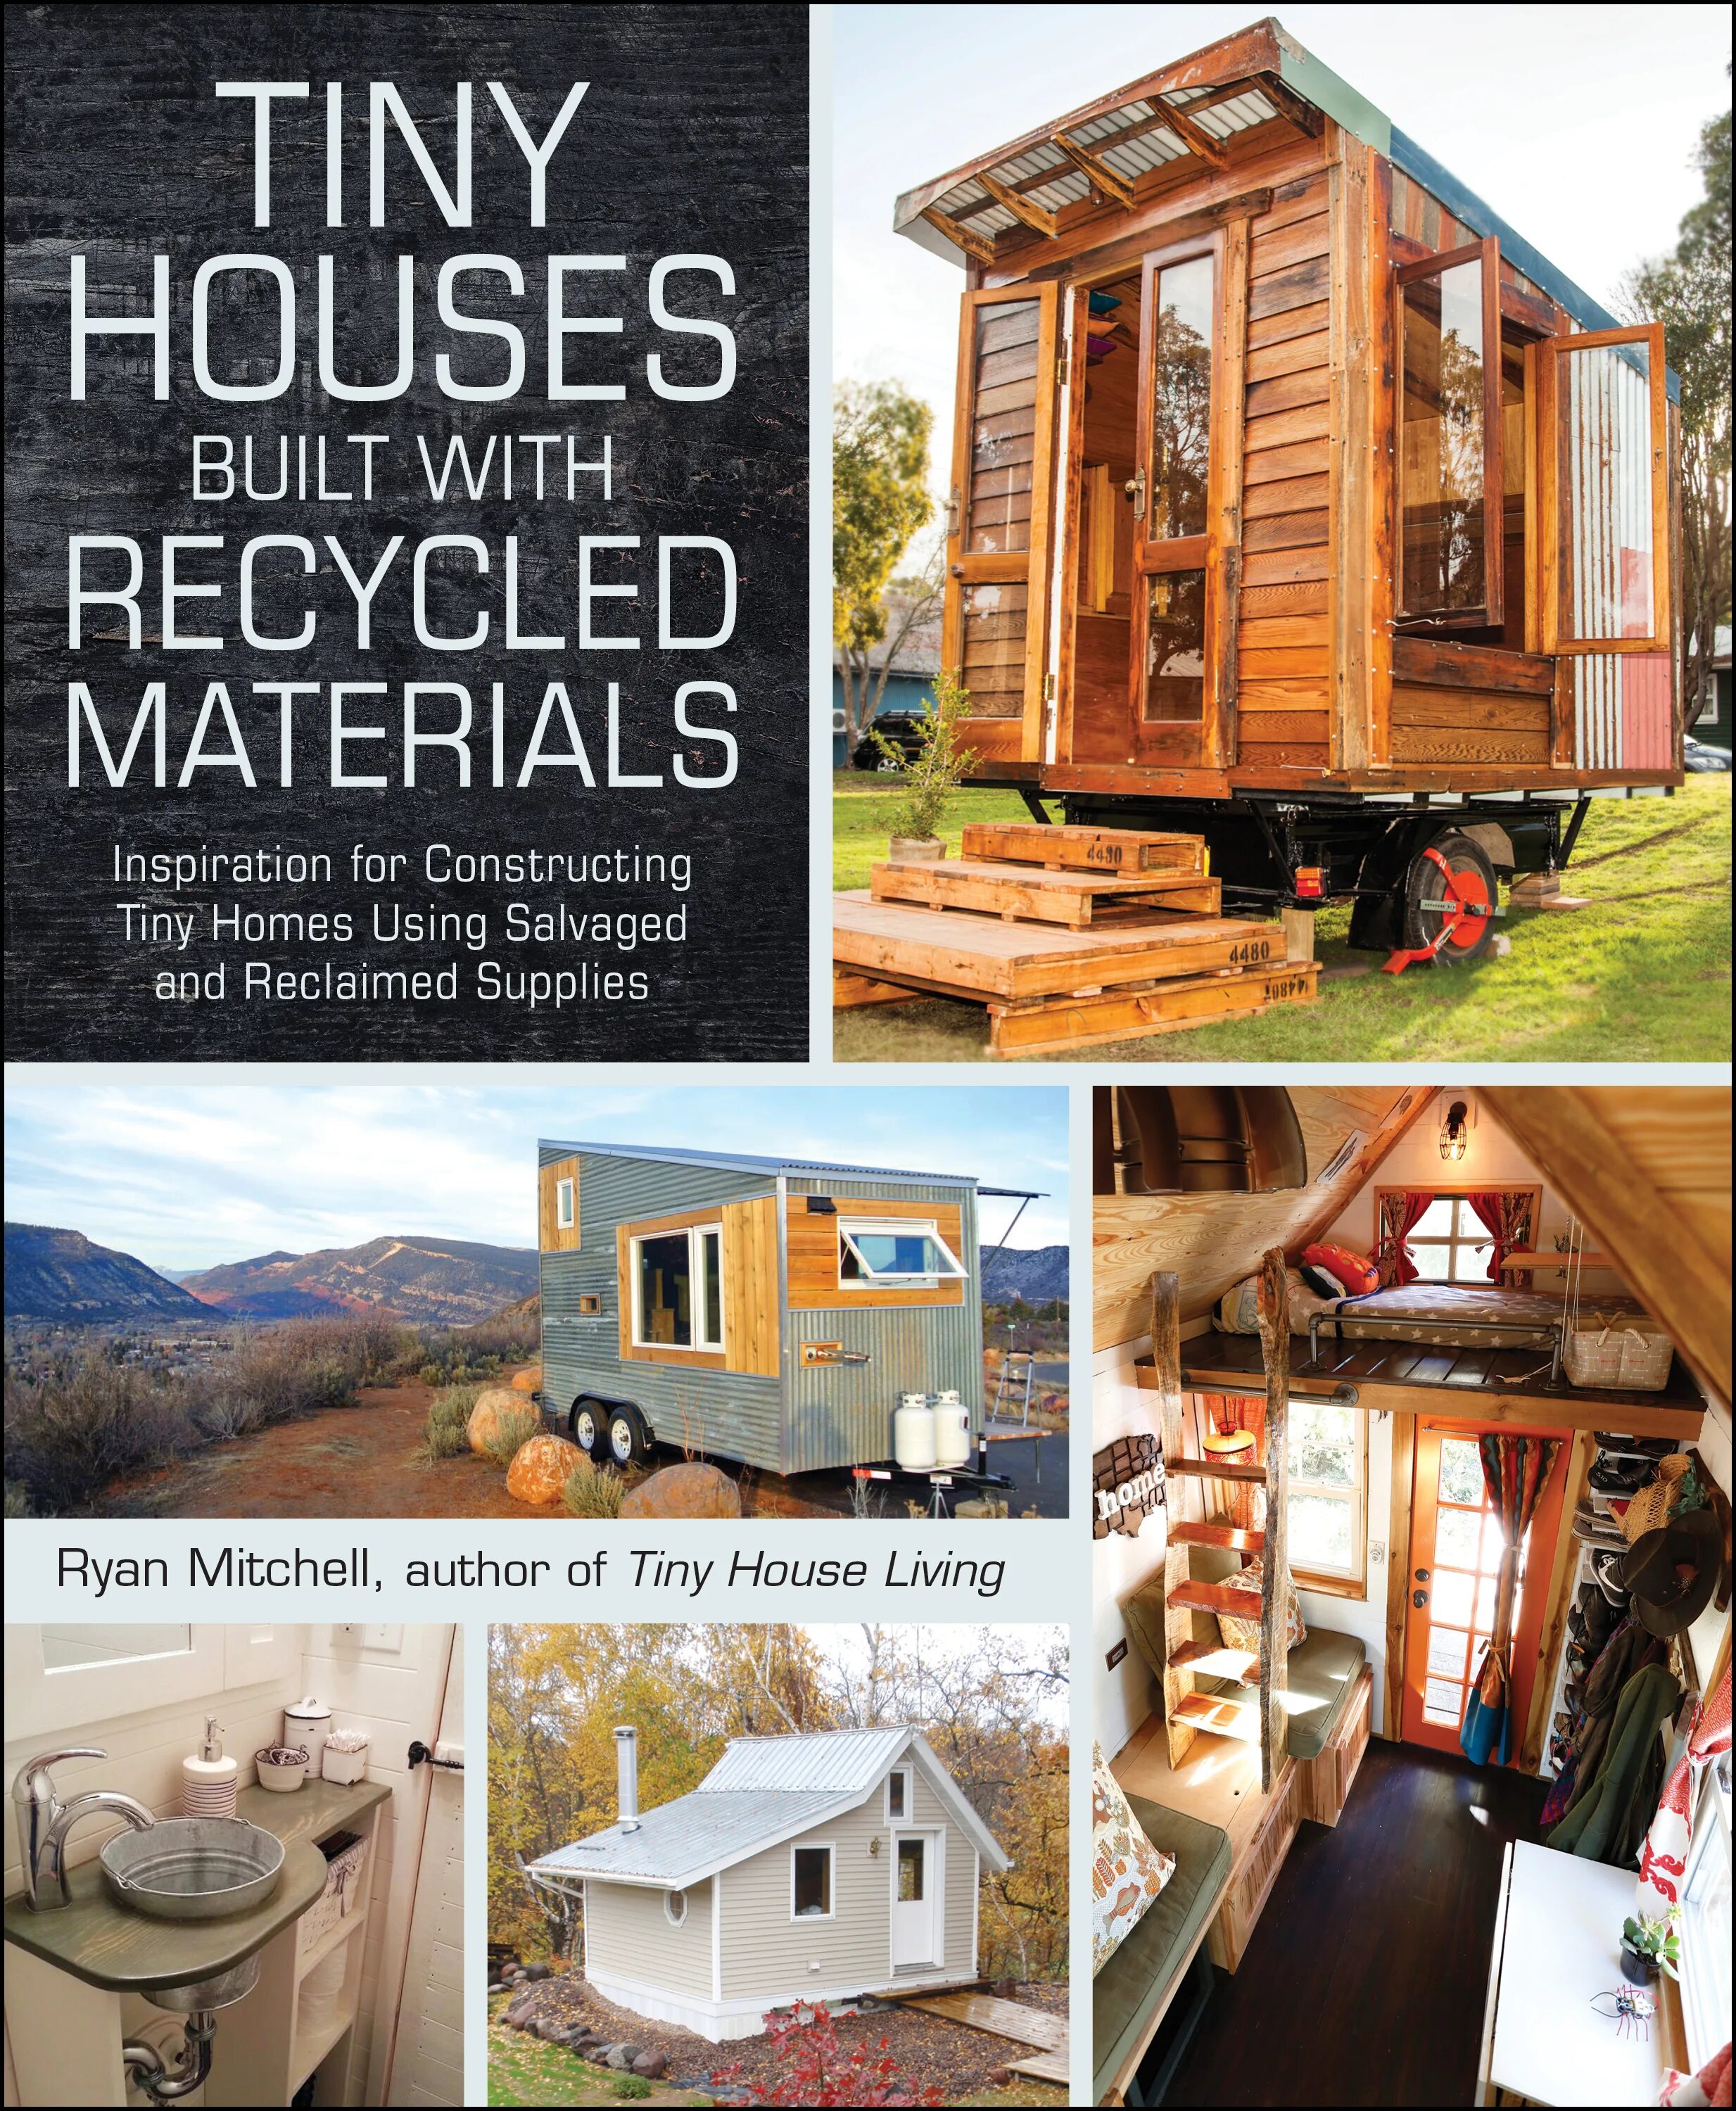 They built this house. Ryan Mitchell how to build a tiny House Guide. Houses are build every Day.